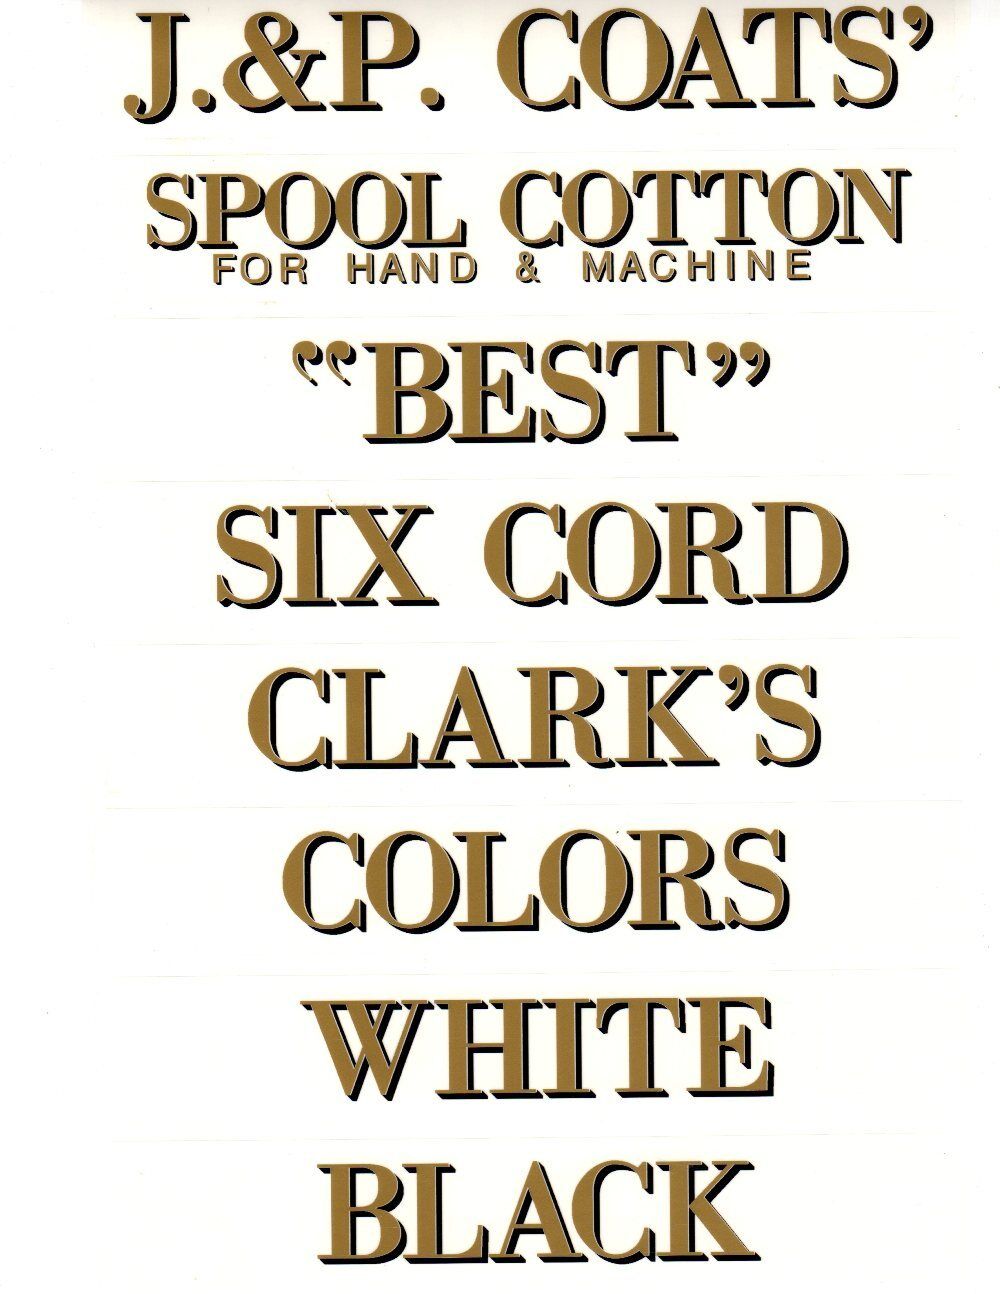 J & P COATS SPOOL CABINET DECALS 8 PIECE SET / GOLD LETTERS with BLACK SHADOW. 